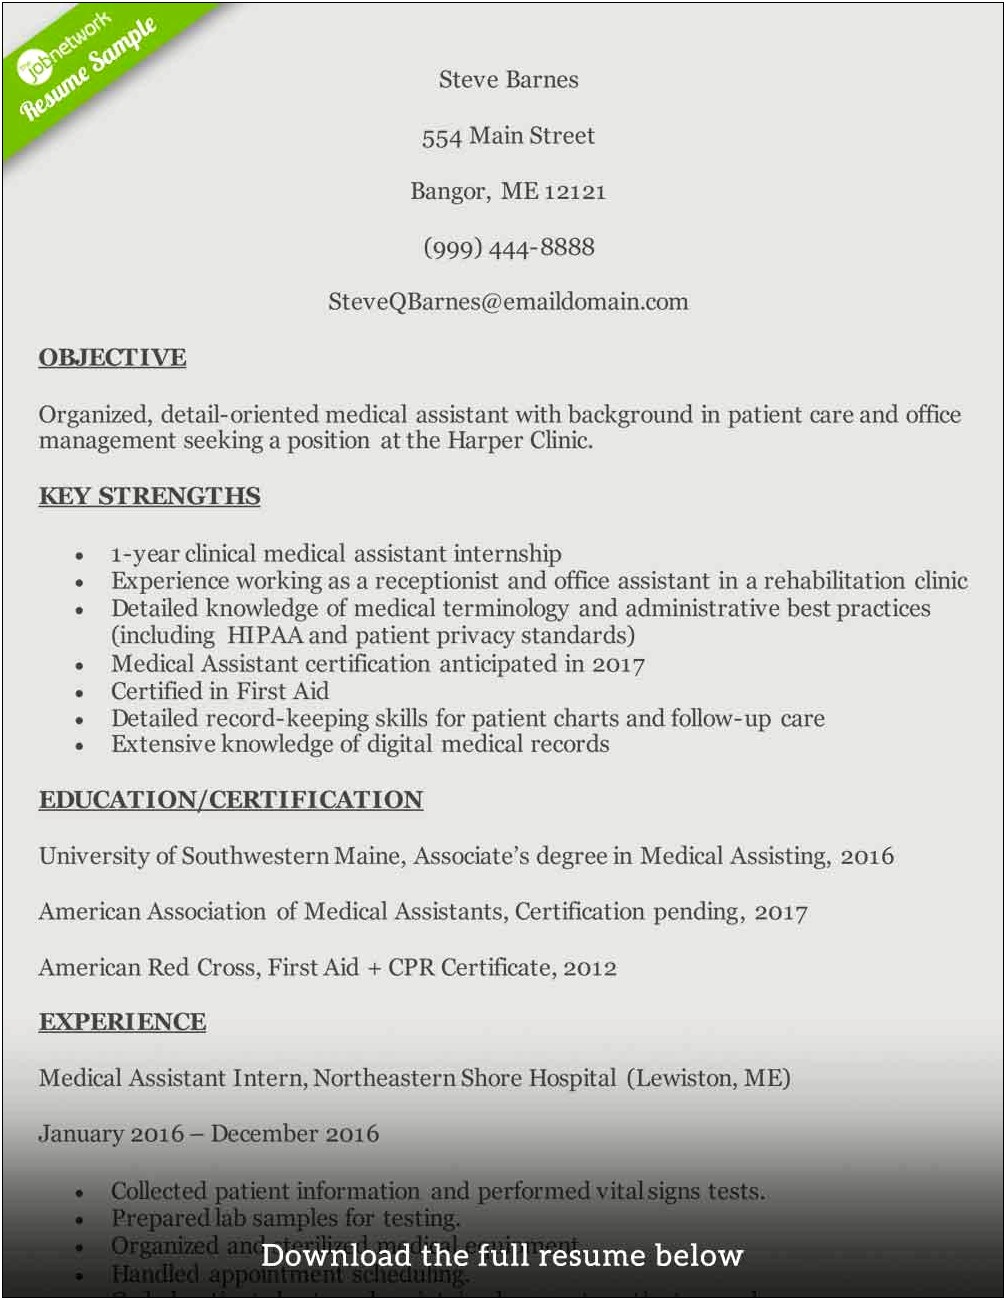 Sample Resume For Entry Level Healthcare Administration